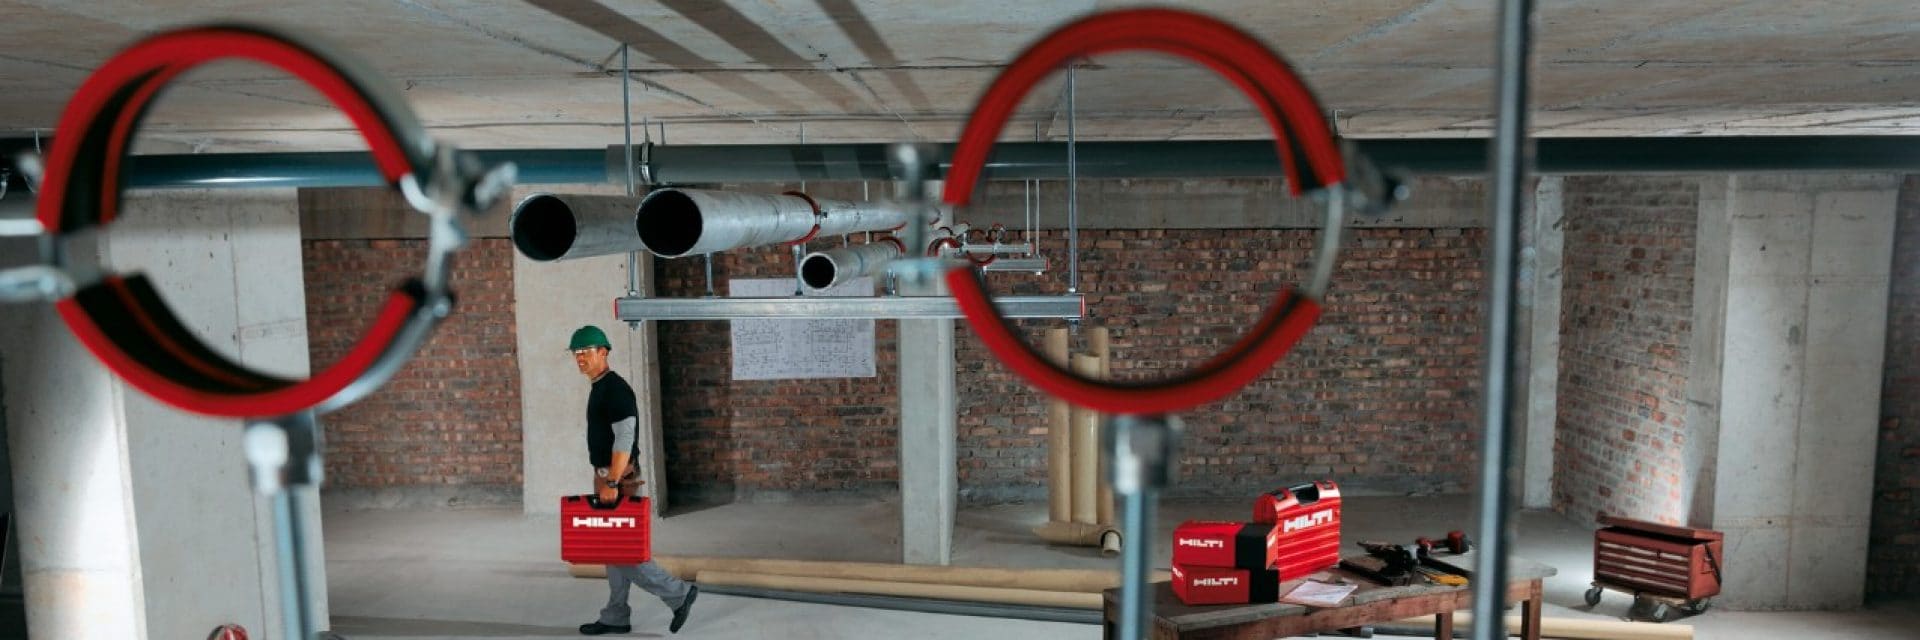 Hilti modular support systems pipe rings